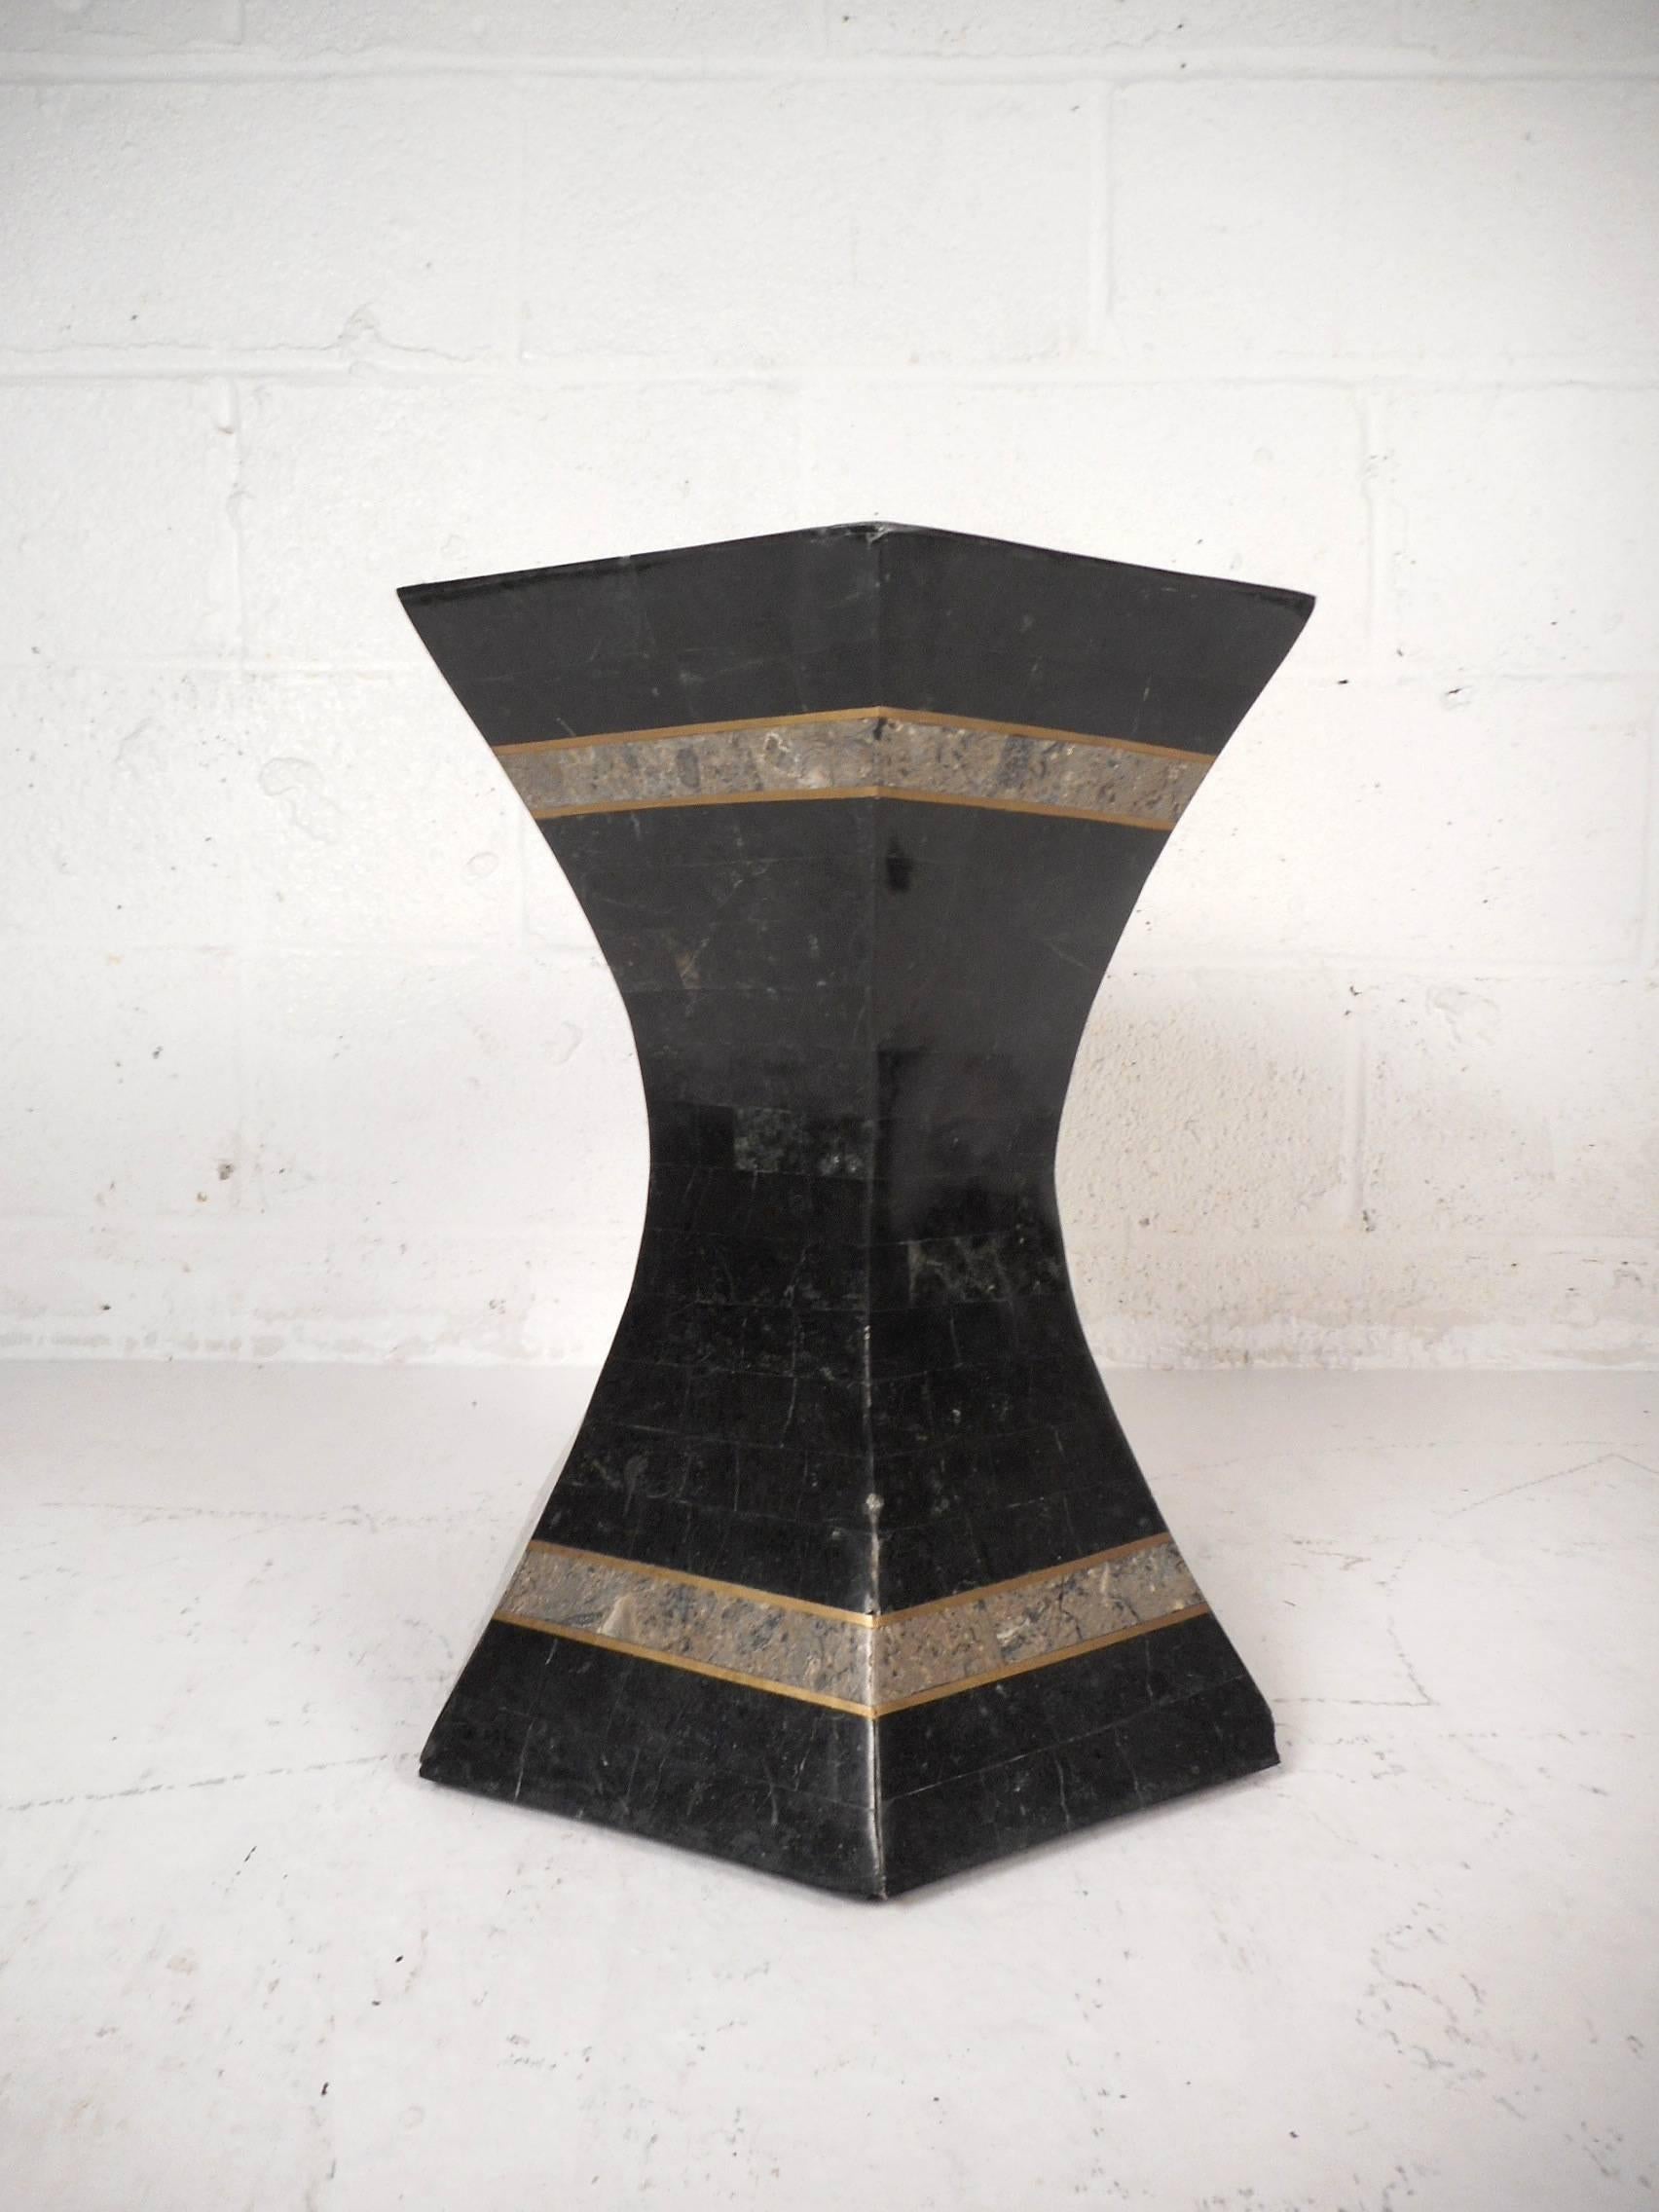 This gorgeous vintage modern set of three pedestal tables feature sleek black tesselated stone with brass inlays. Wonderful two-tone design with a sculpted body and beveled edges adding to the allure. This unusual mid-century set can be used as side